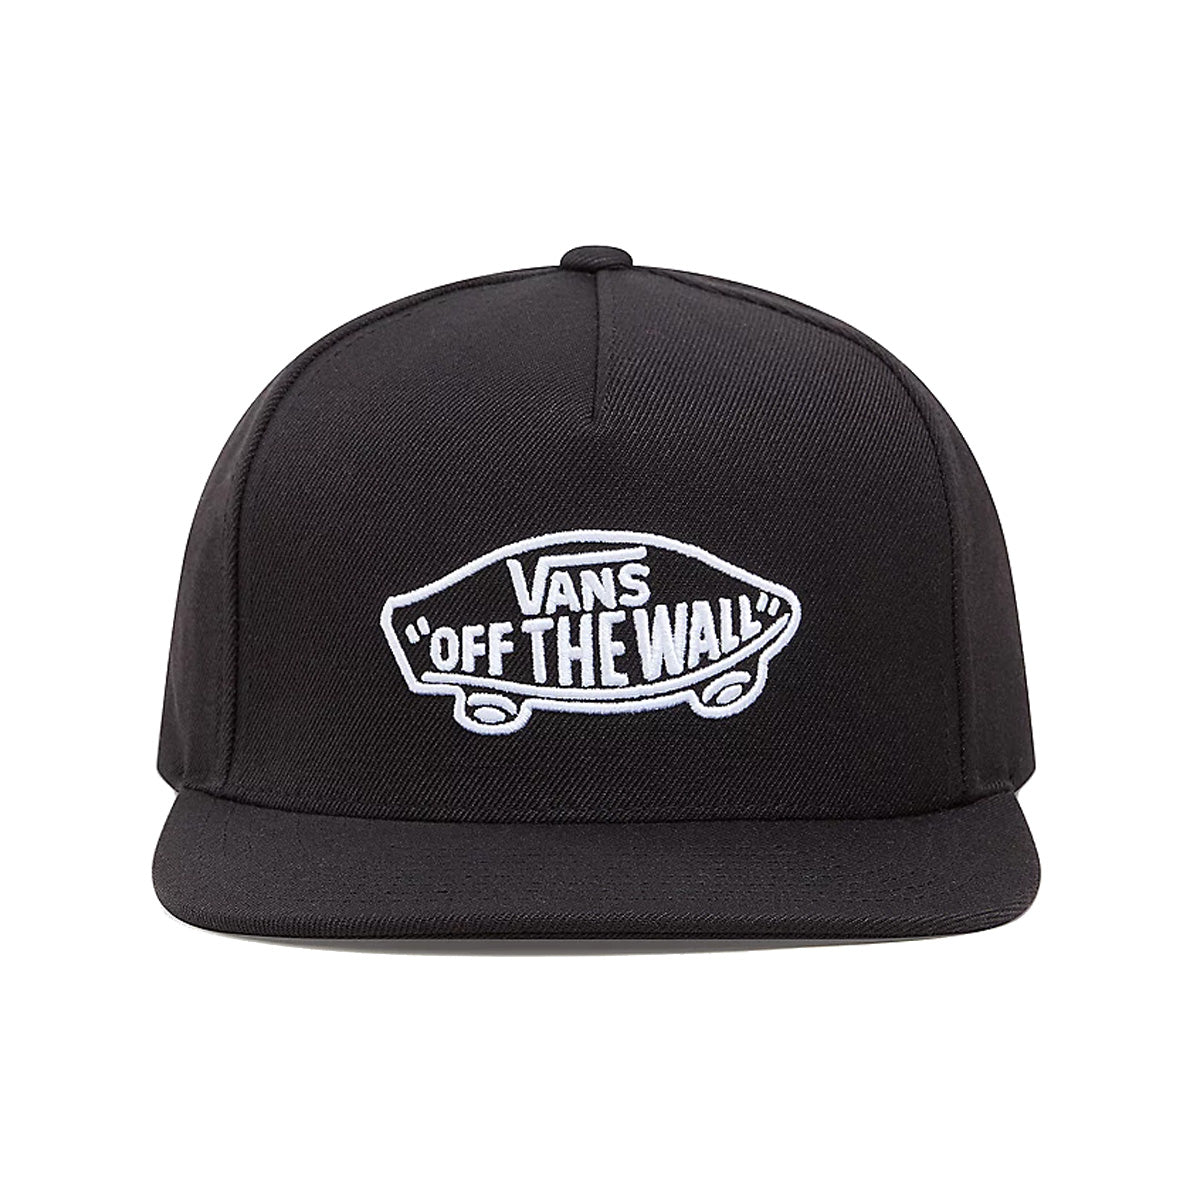 Black vans six panel cap with white vans “off the wall” logo on front and adjustable strap on back. Free uk shipping over £50